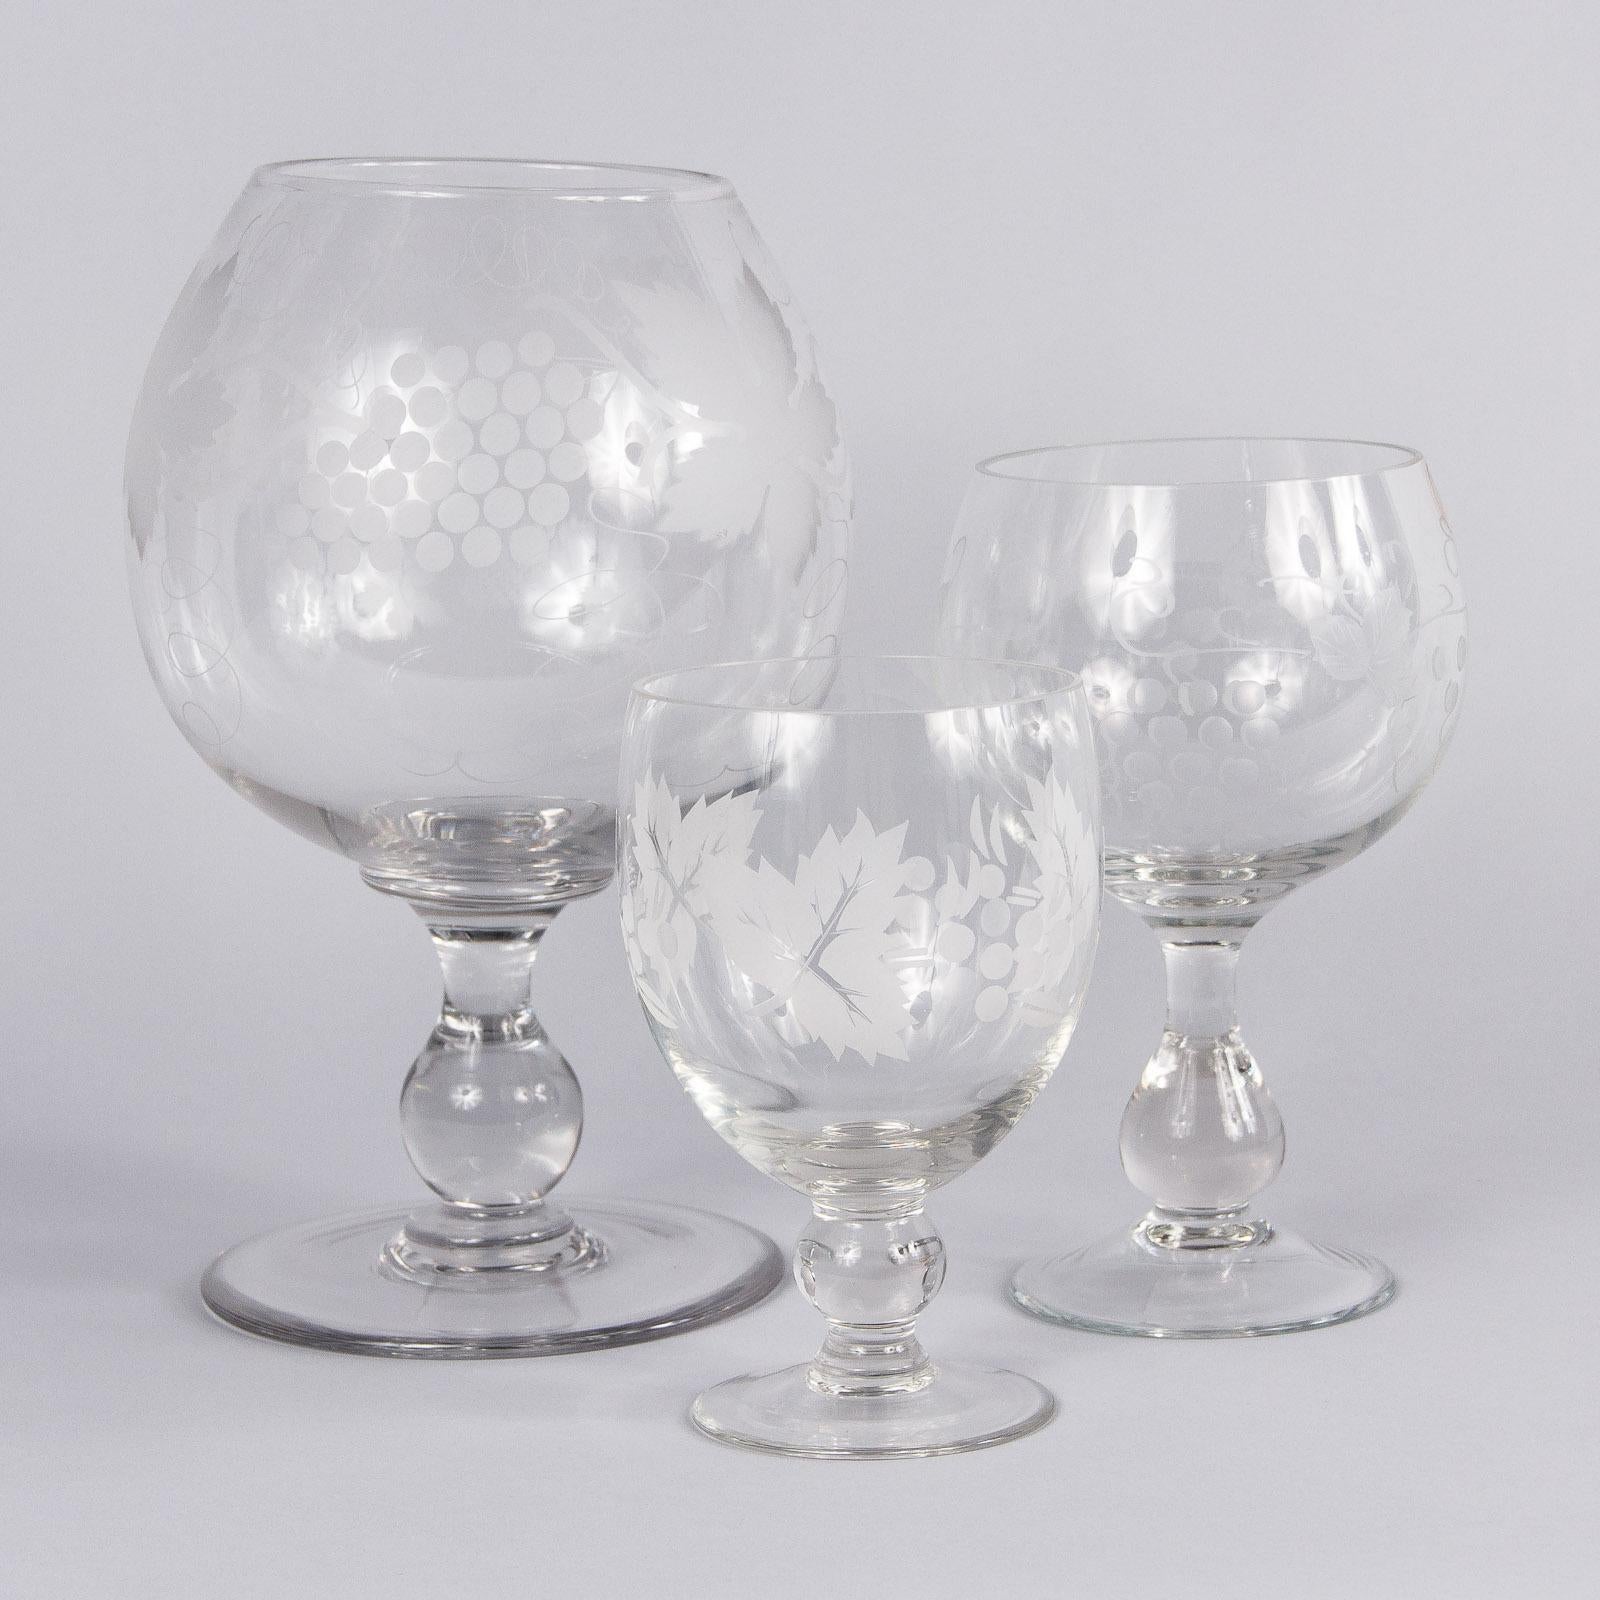 An oversized and decorative hand blown crystal wine glass with etched grapes and vine motifs from the Beaujolais region of France.